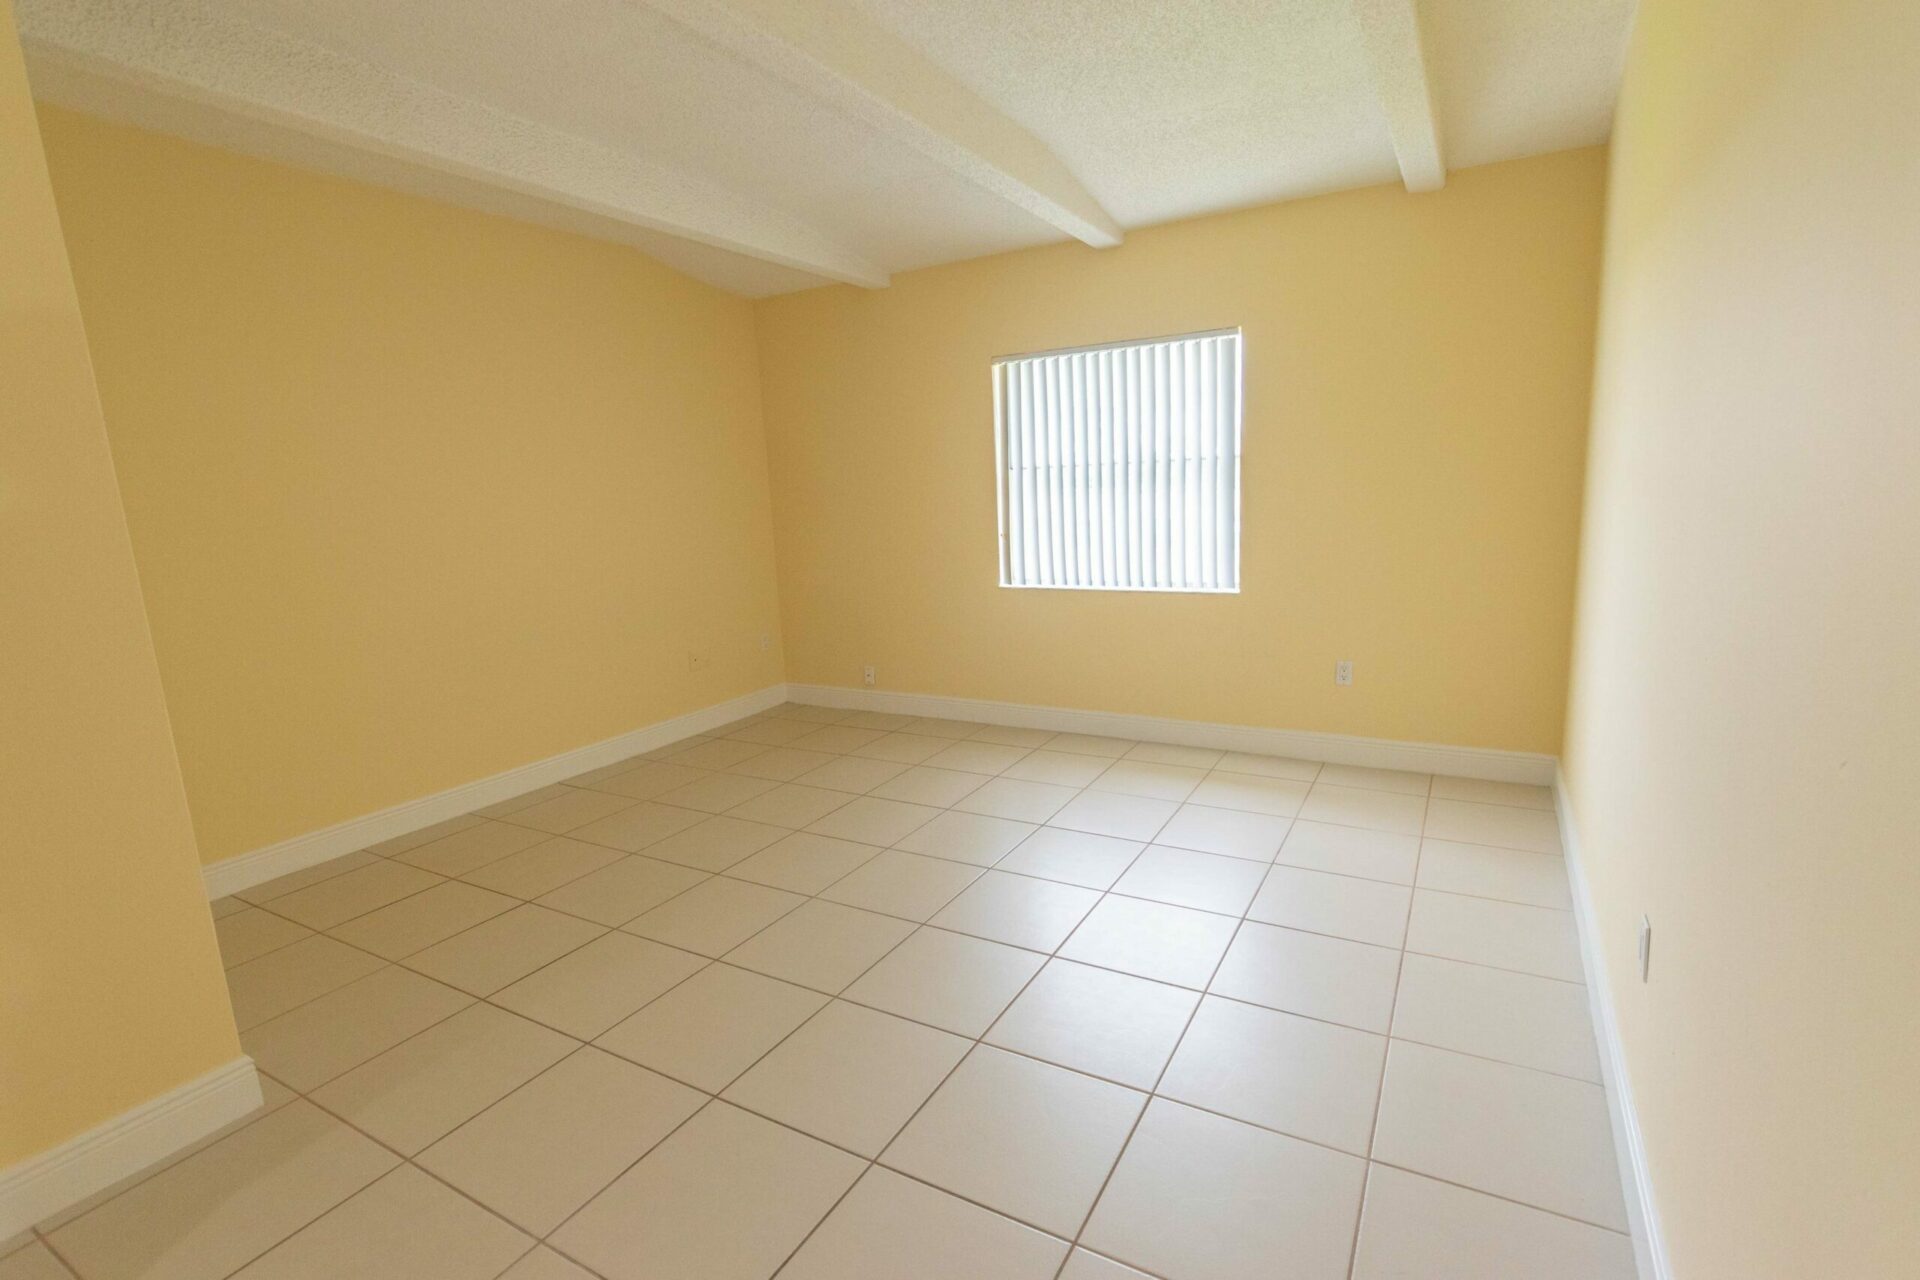 Spacious area with a large window, yellow walls, and white tiles in a Miami, FL apartment.